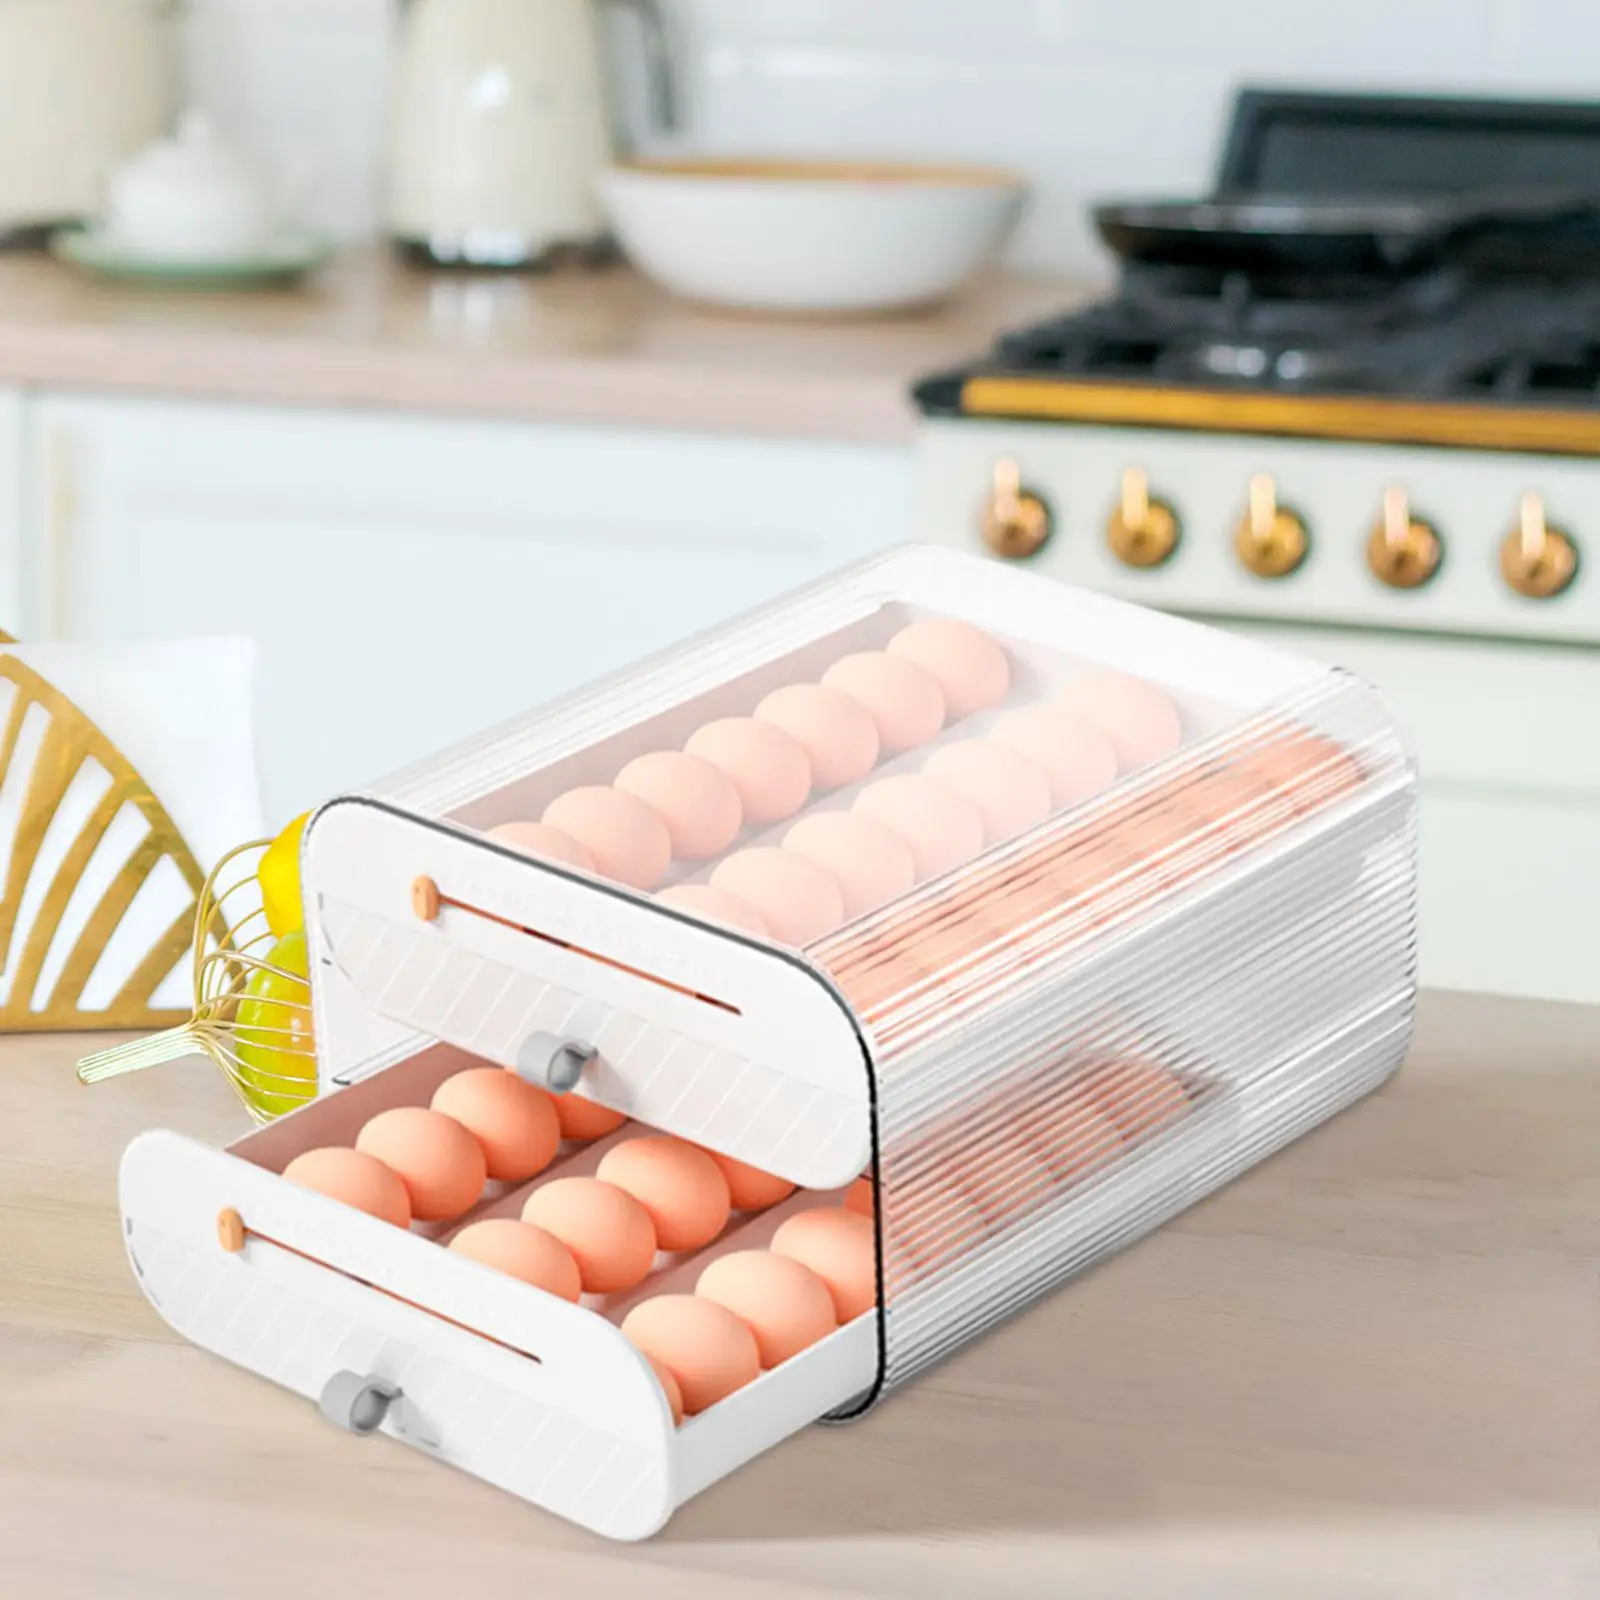 Egg Holder Tray Clear Large Capacity 2 Layer Drawer Trays Refrigerator Organizer Bins with Time Table for Refrigerator Cupboard